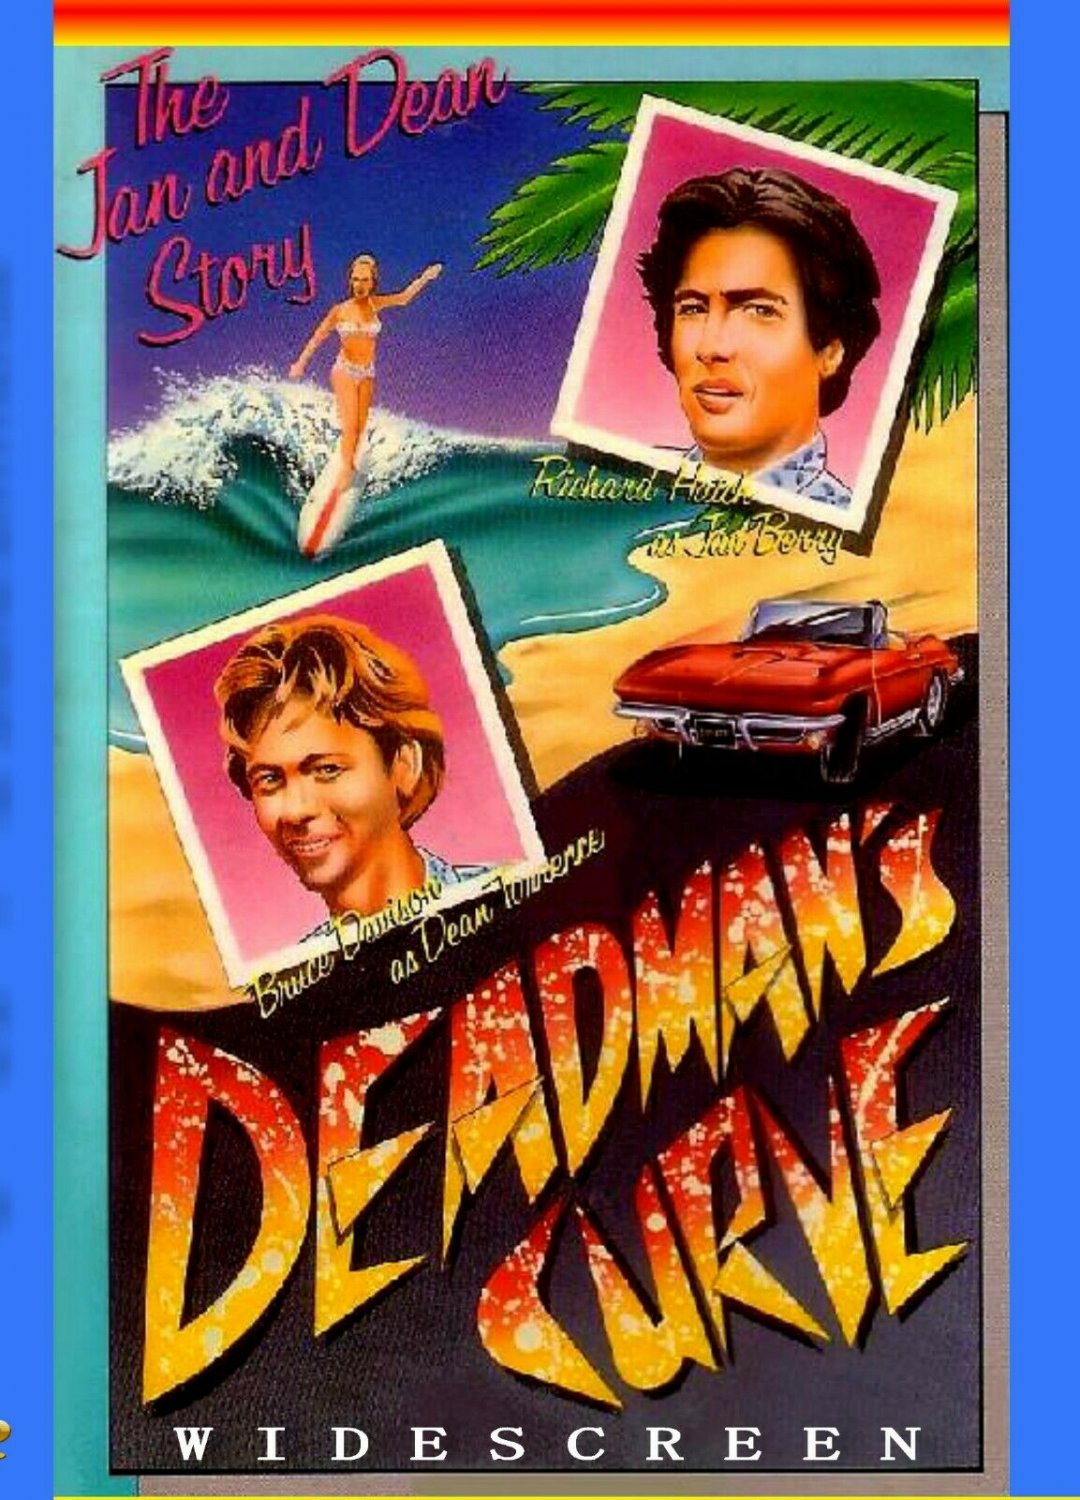 Dead Man's Curve: The Jan & Dean Story  (DVD Remastered) Widescreen